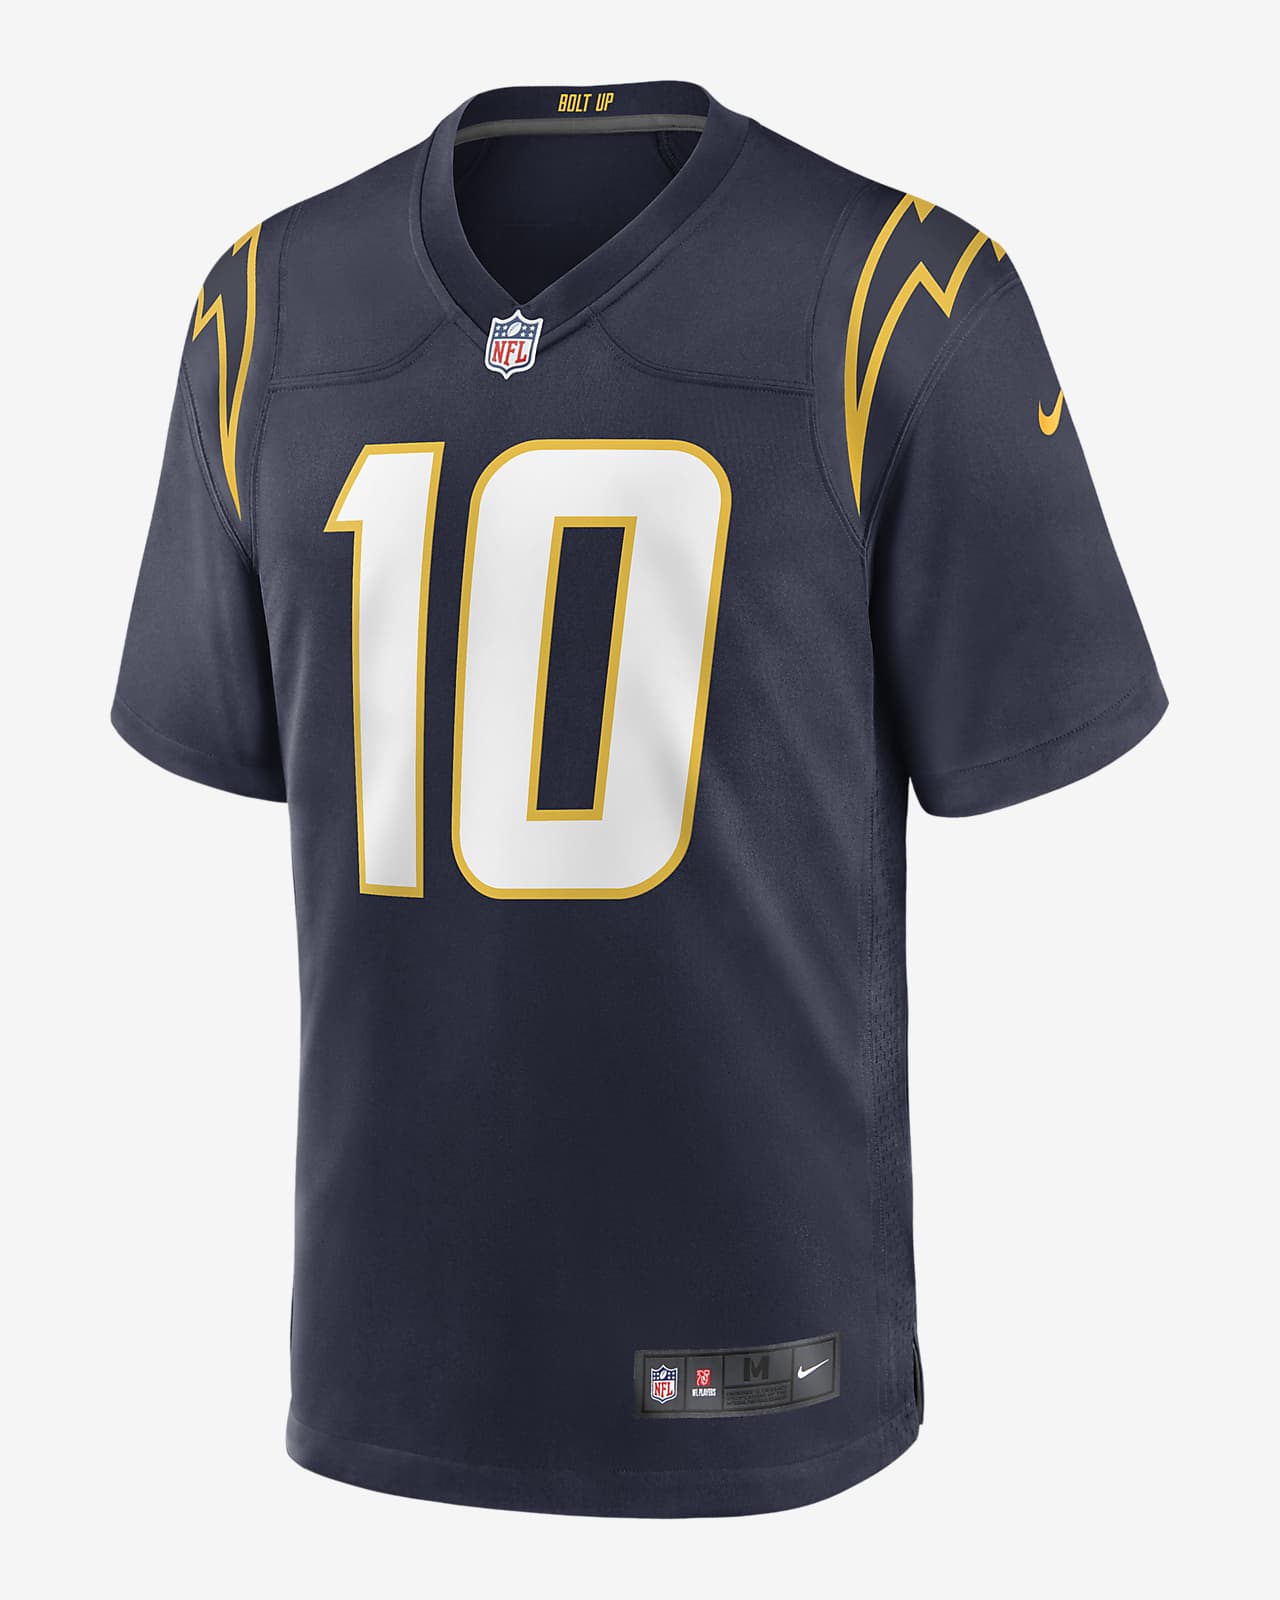 Los Angeles Rams Nike Jersey - XL Navy Polyester